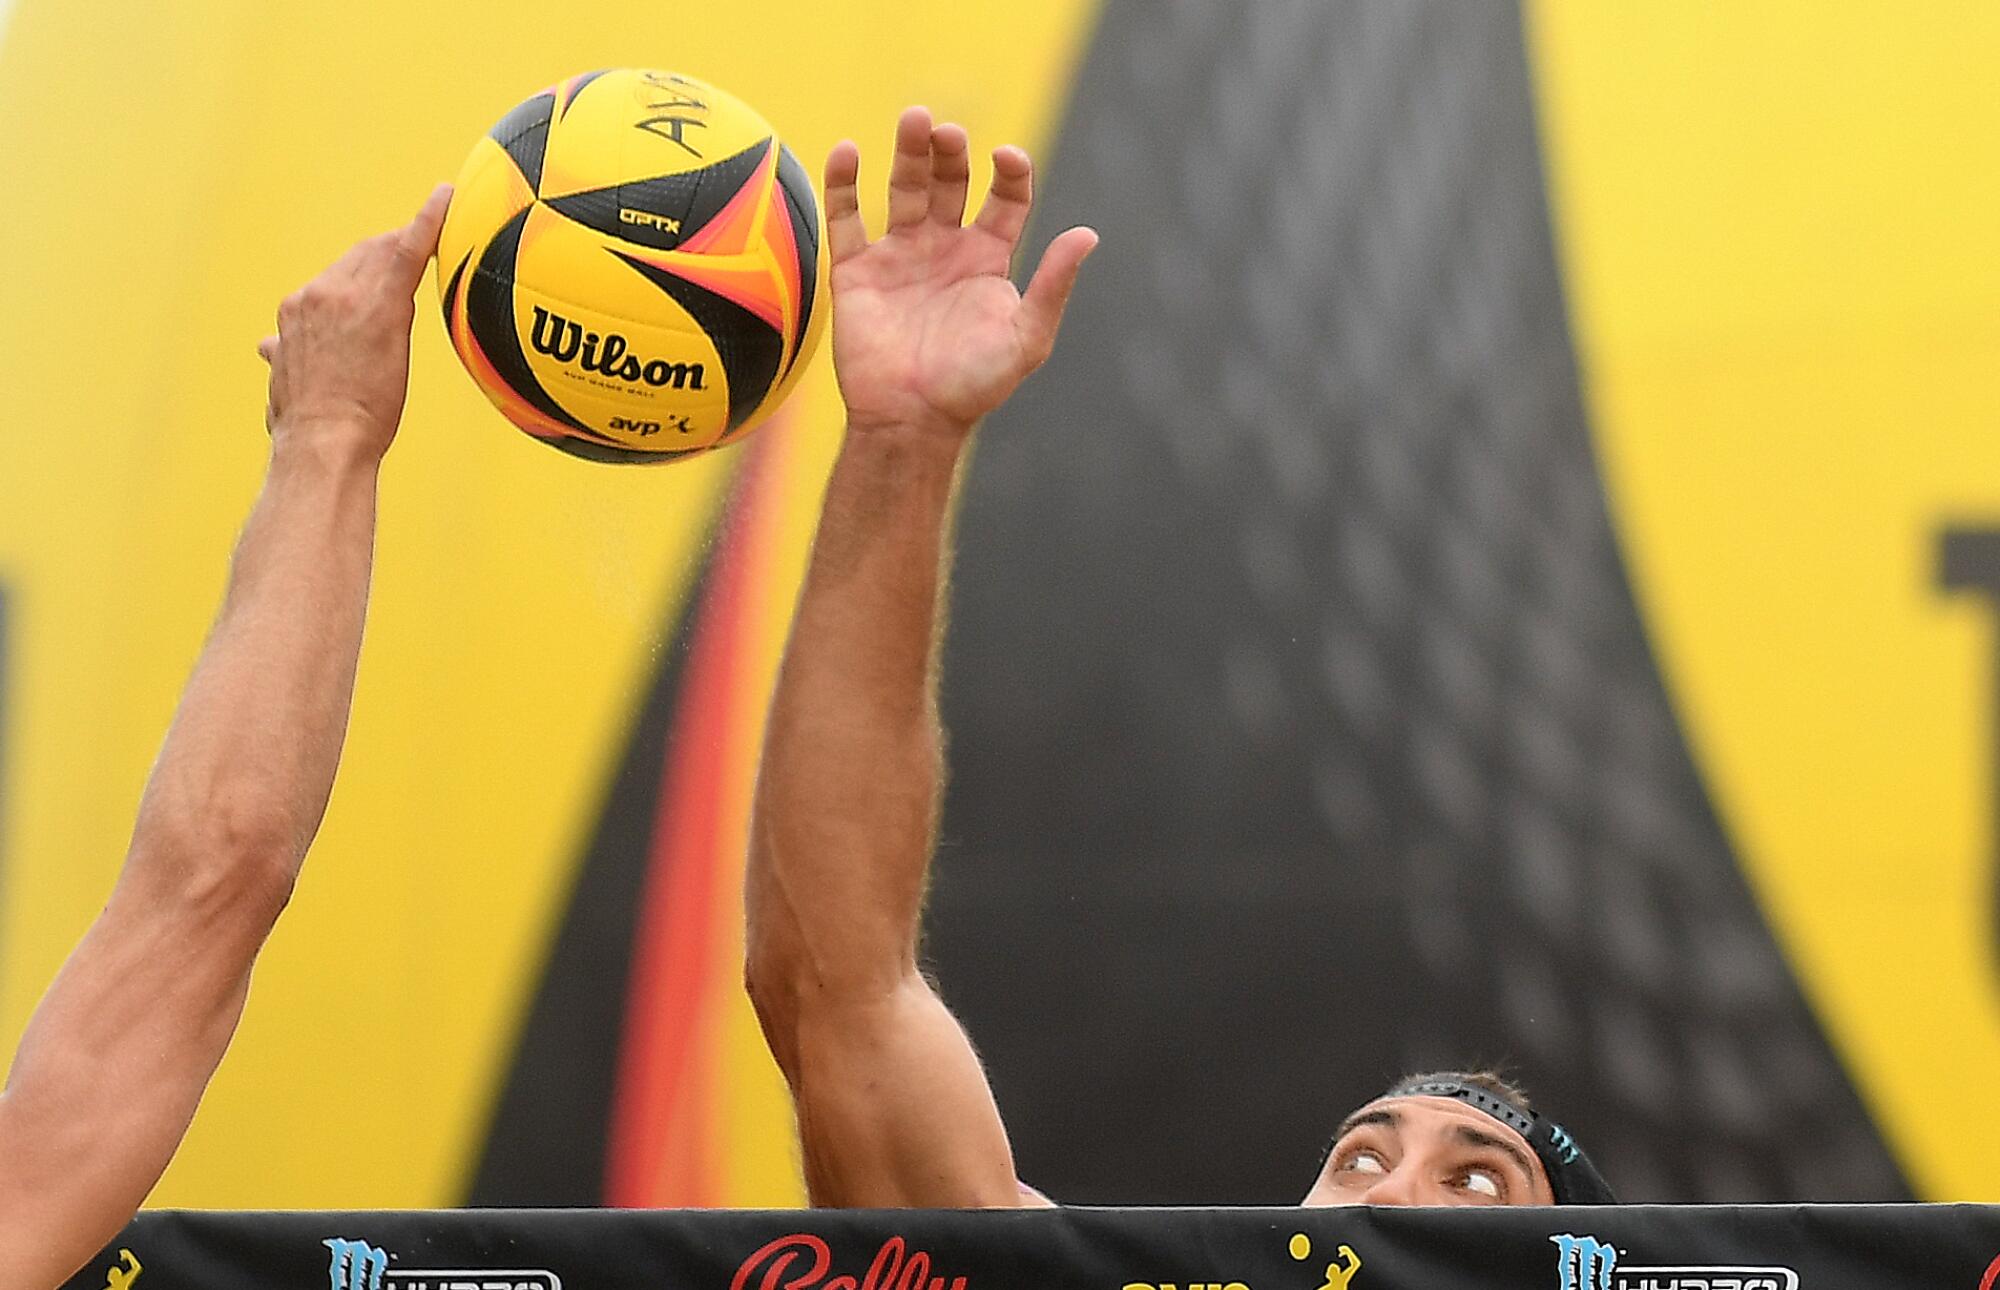 Volleyball players' hands reach over the net to try to hit a yellow and black Wilson volleyball.